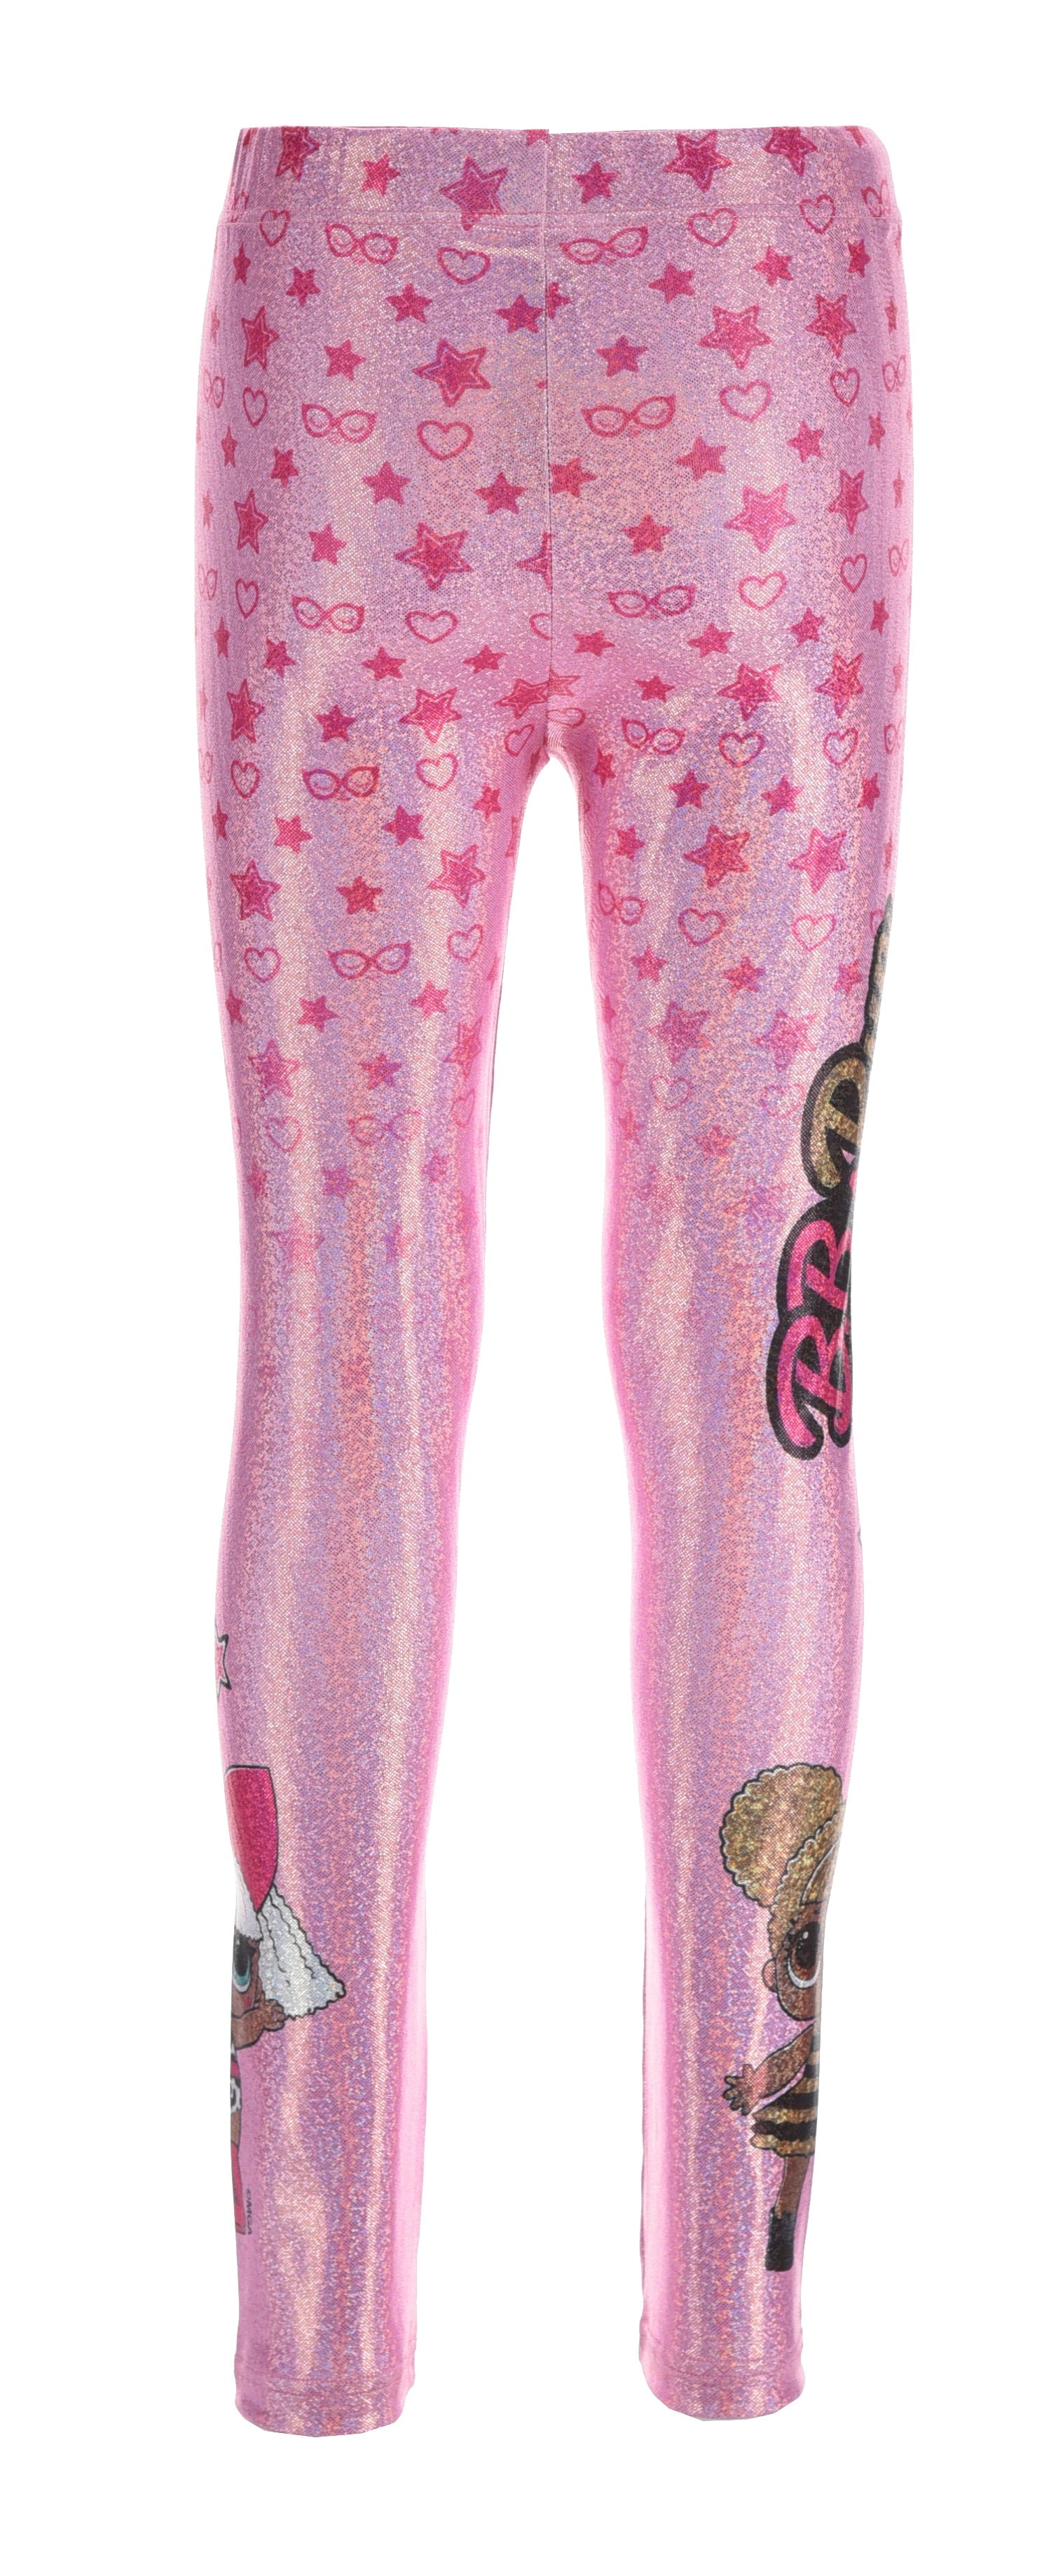 L.O.L Surprise Shiny Leggings, Pink, Ages 5-6 (116cm), 7-8 (128cm), 9-10 (132cm), CM Sizes Are The Approximate Height Of The Child, 92% Polyester 8% Elastane, Official Merchandise